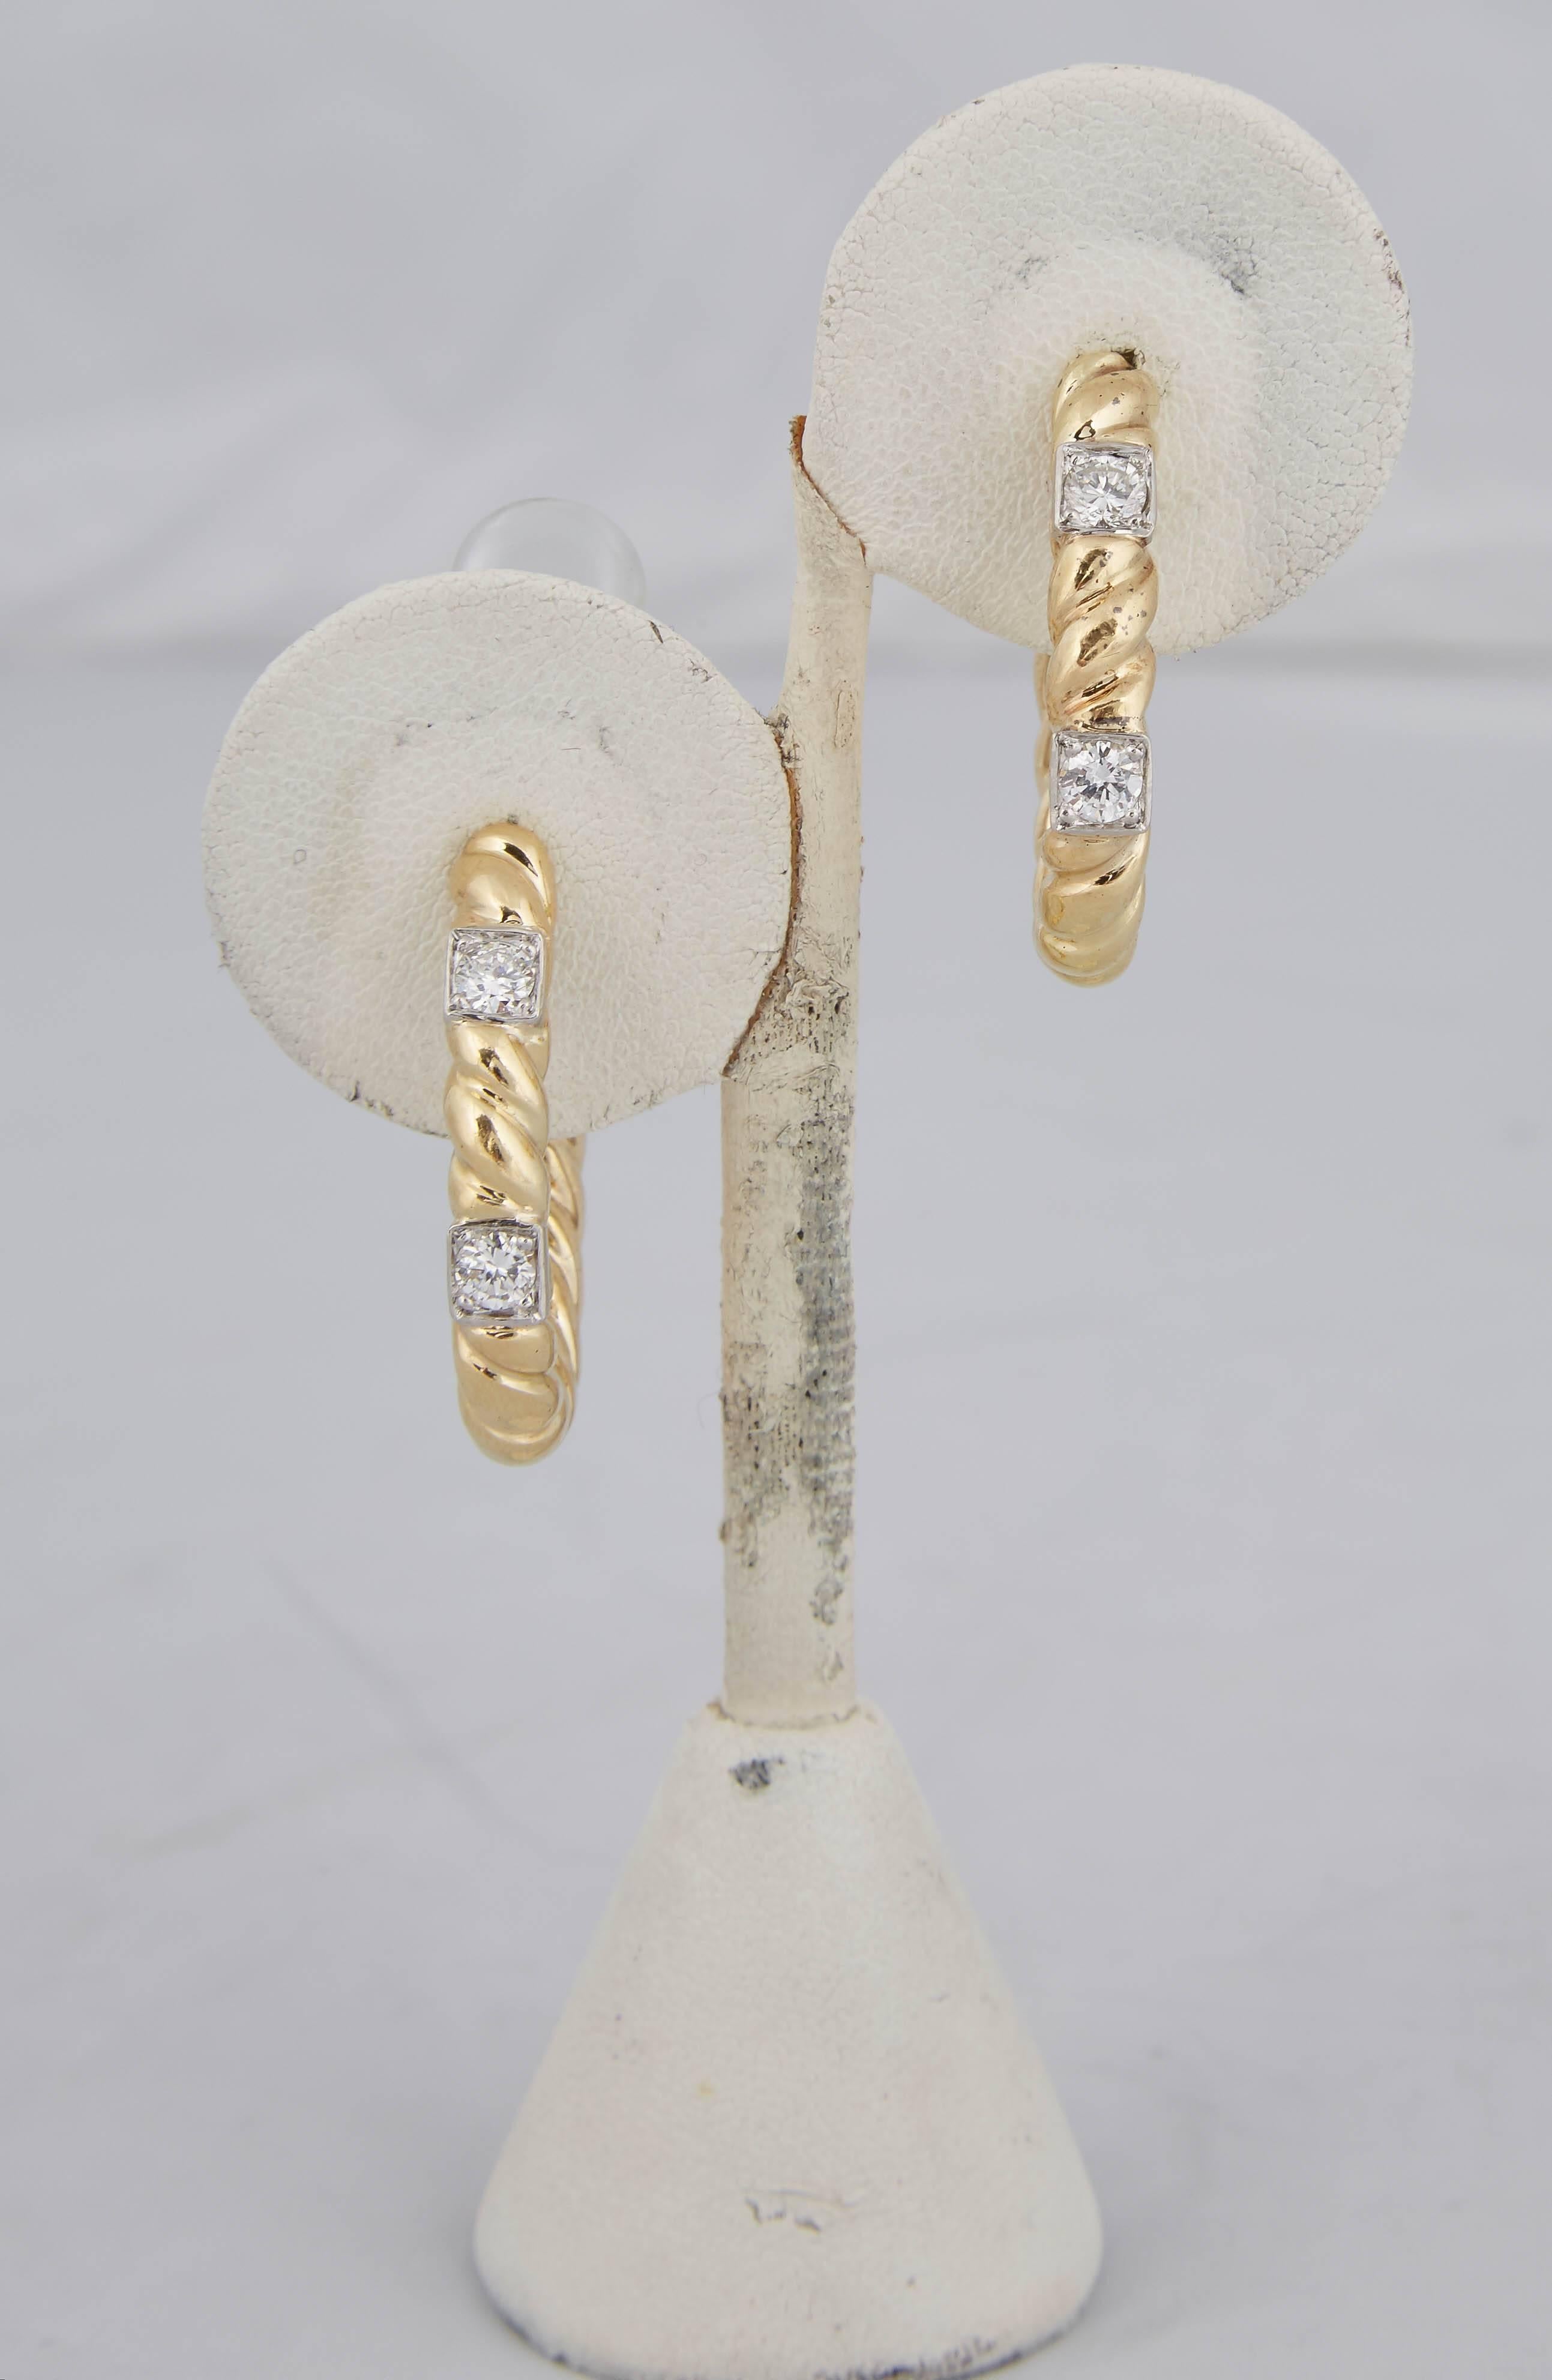 18kt Yellow Gold Twisted Gold Design Hoop Earrings With .64 Total Weight Of Very High Quality Full Cut Diamonds. Each Diamond Weighing .16ct Each. . Earrings Created With Very Fancy High quality Clip-On Back Closures . NOTE Posts May Be Added For